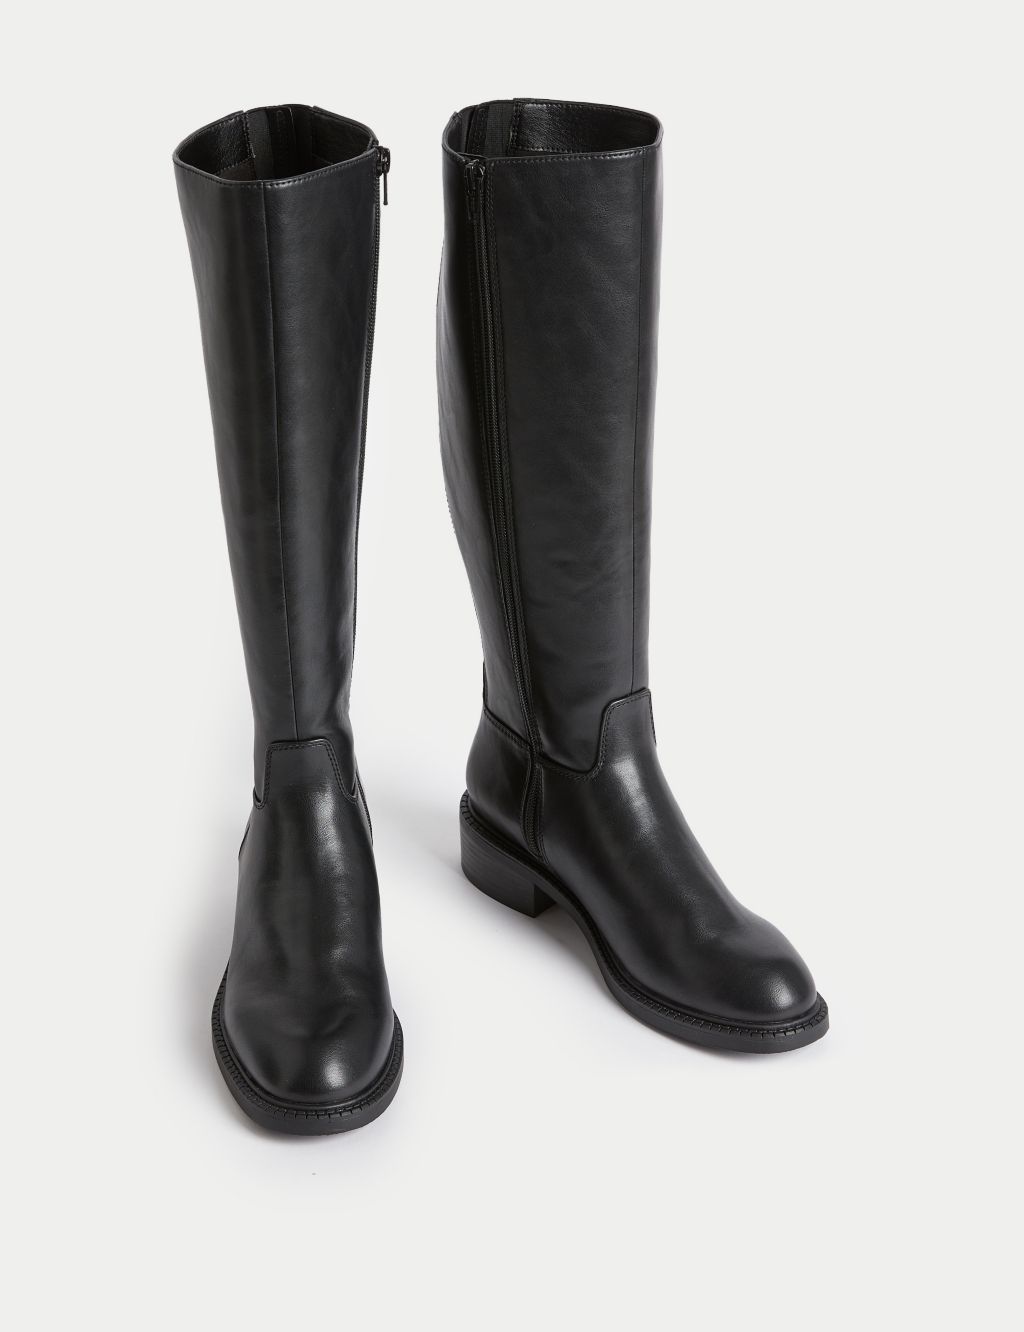 Riding Flat Knee High Boots image 2